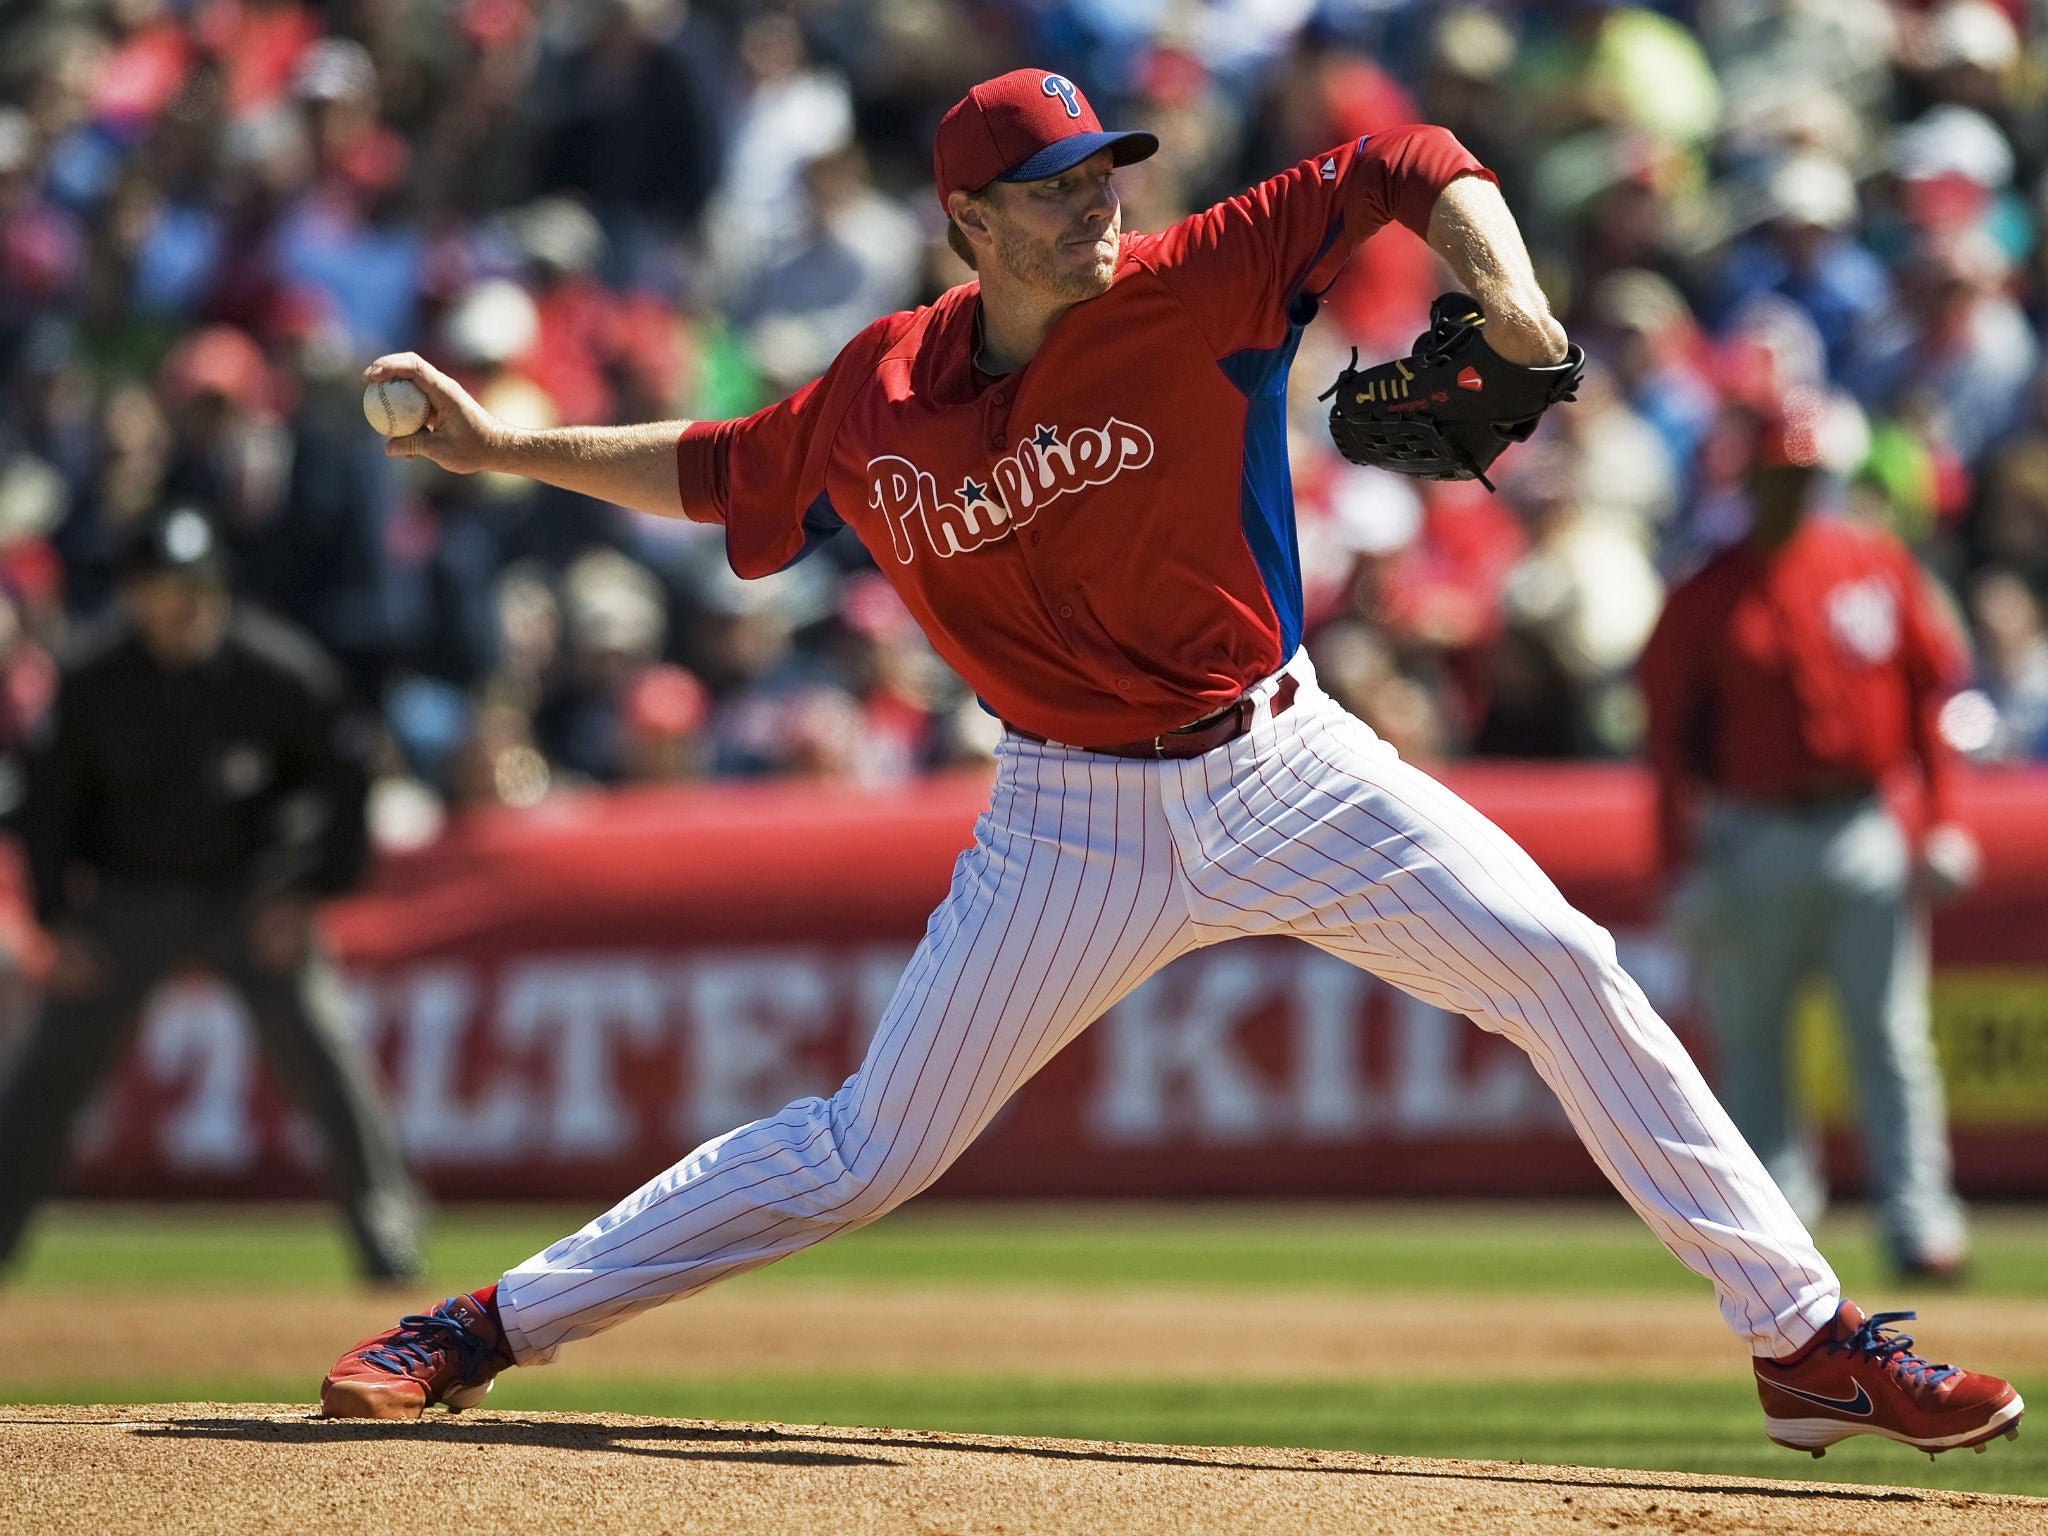 Roy Halladay pitches for the Philadelphia Phillies during a spring training game against the Washington Nationals in Clearwater, Florida, on March 6, 2013. The Phillies organisation said it was 'numb' over his death